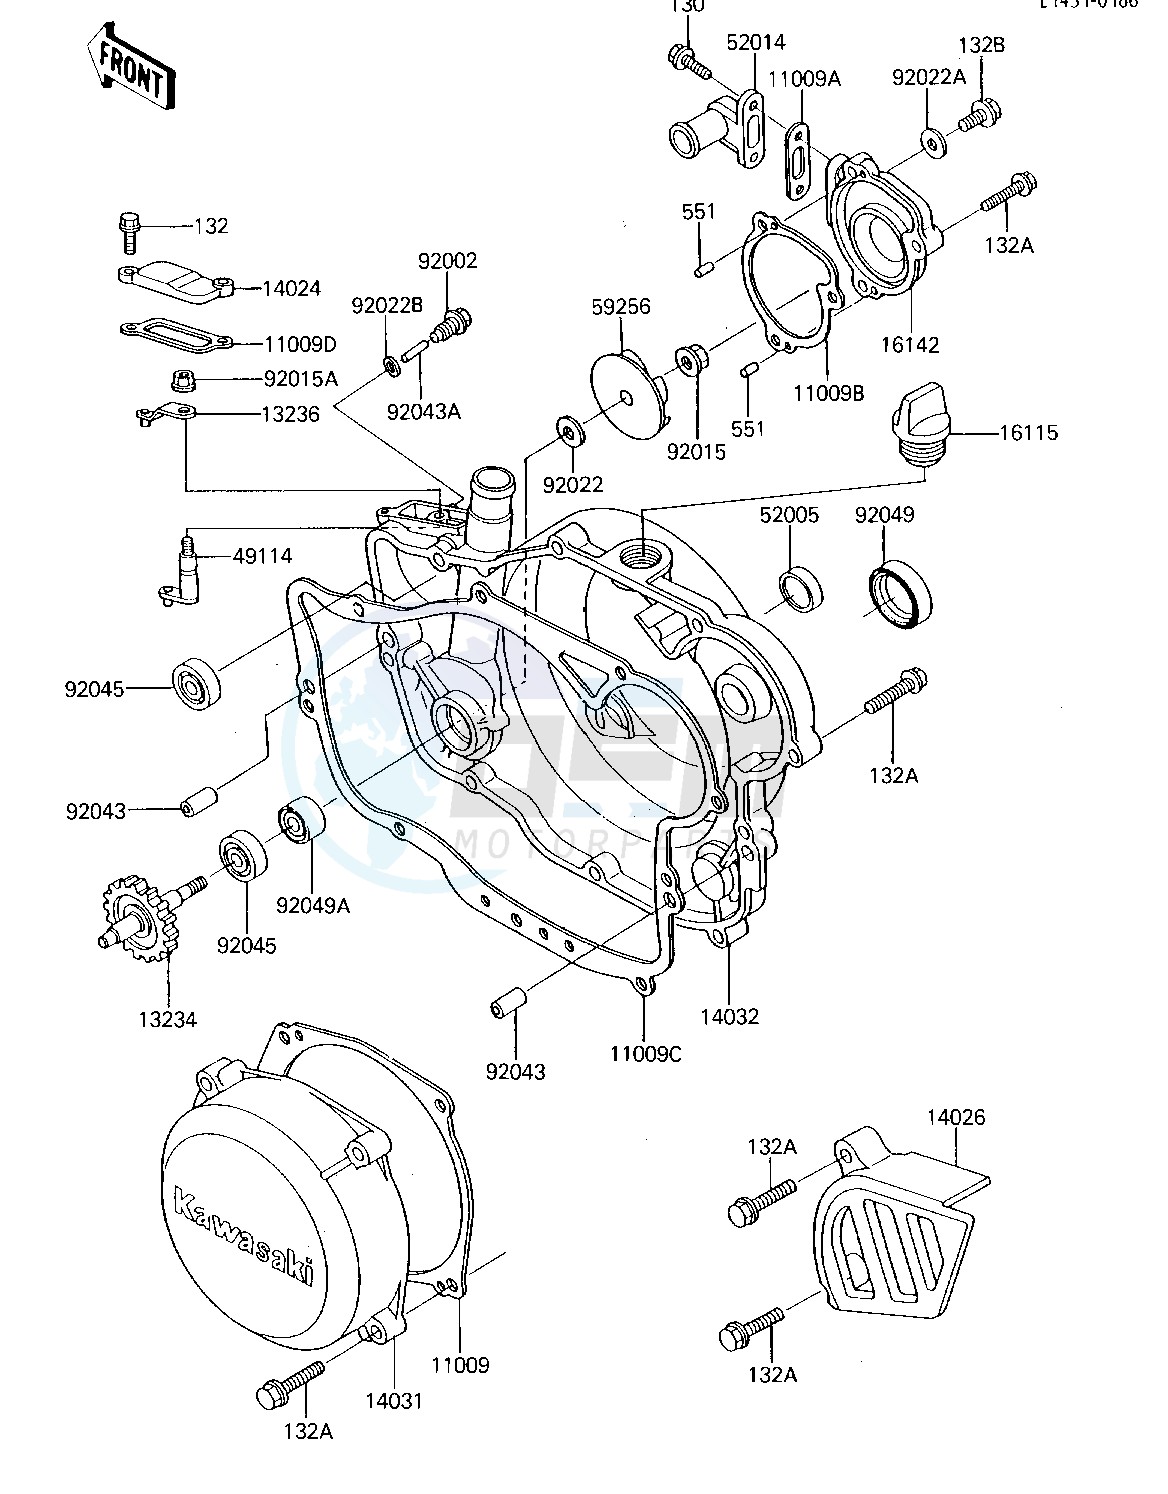 ENGINE COVERS_WATER PUMP blueprint